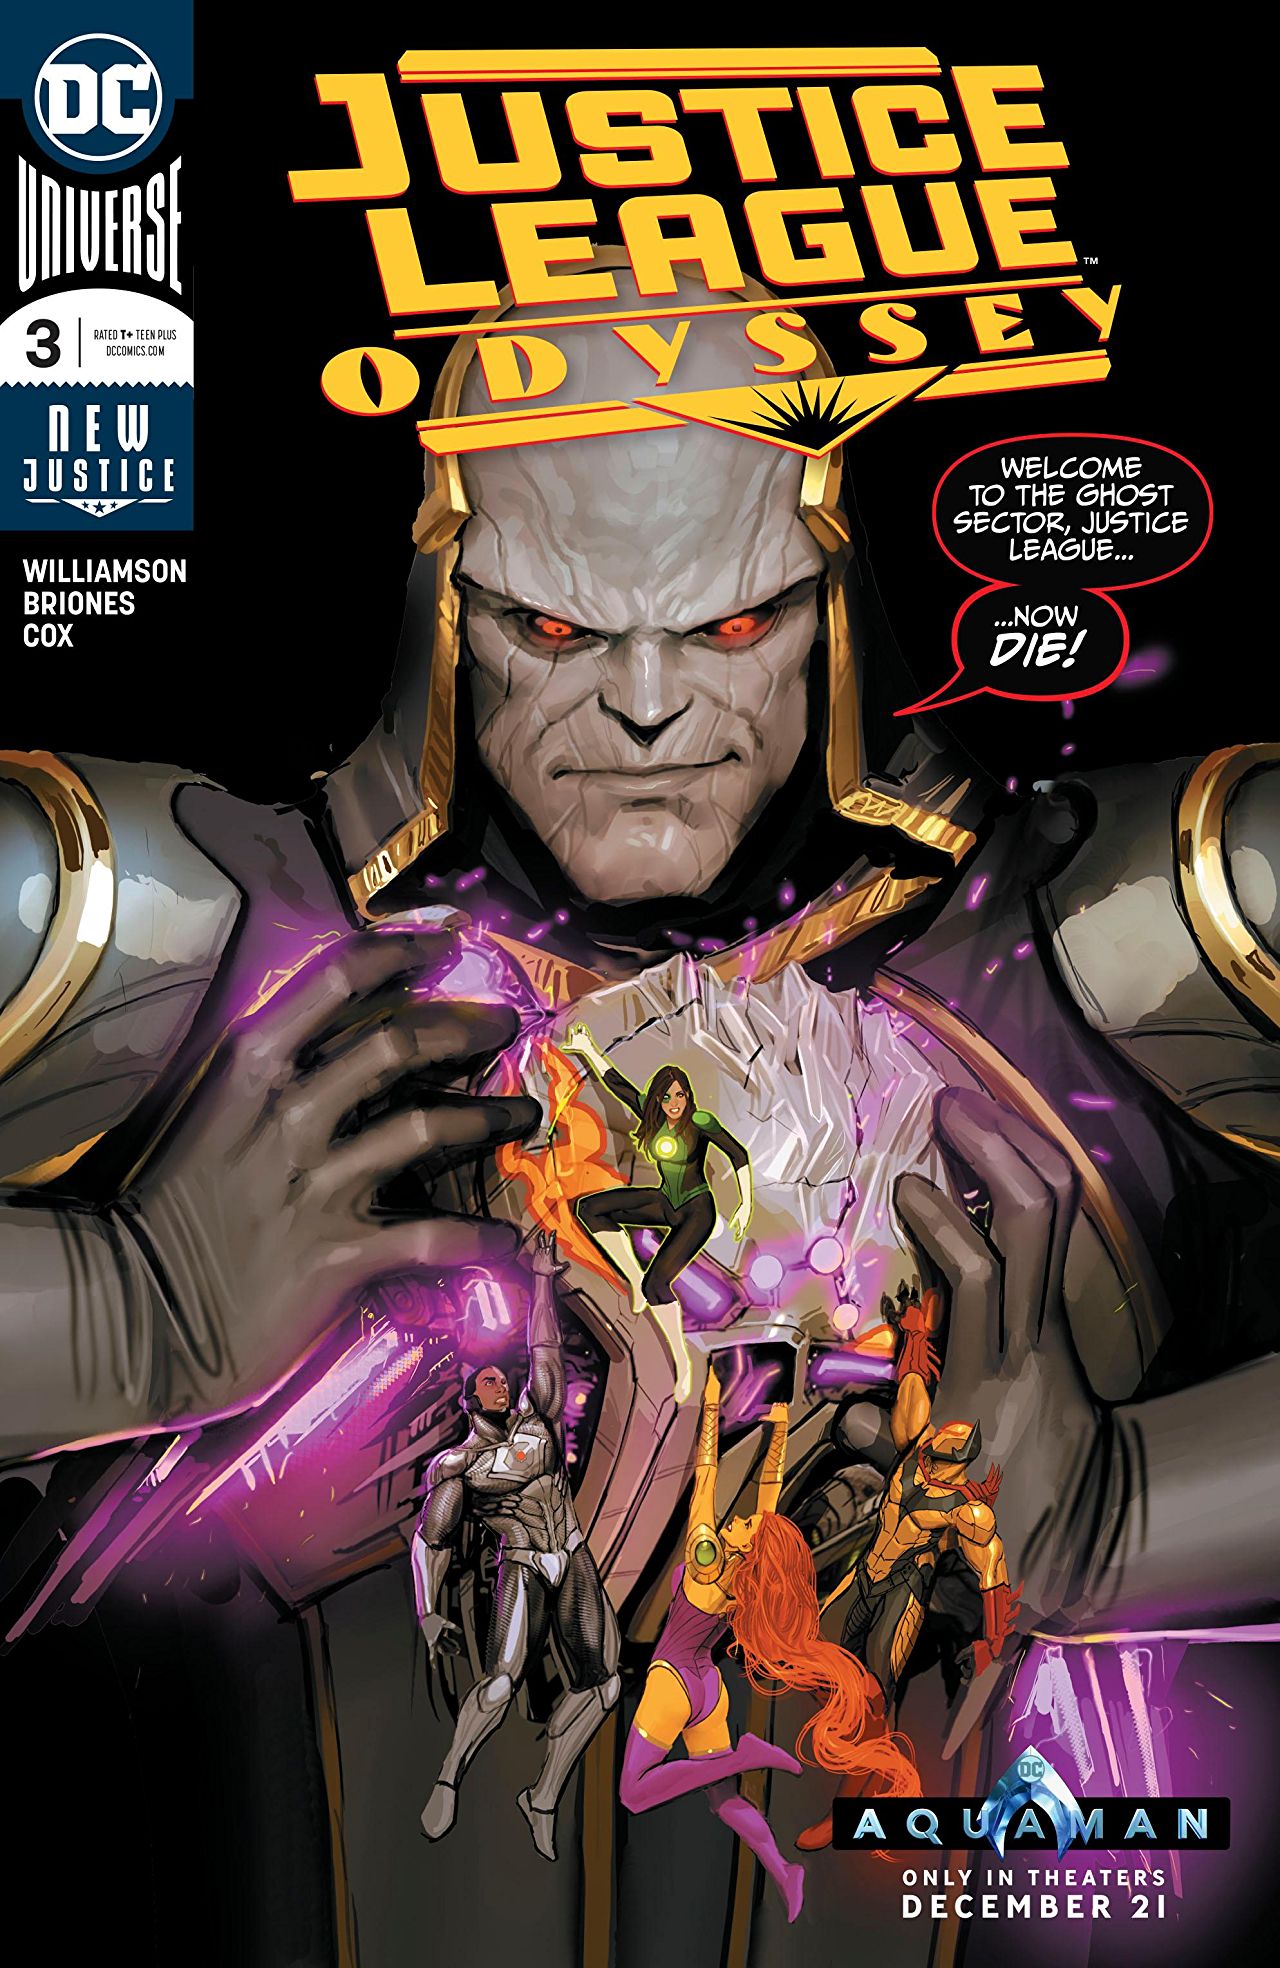 Justice League Odyssey #3 Review